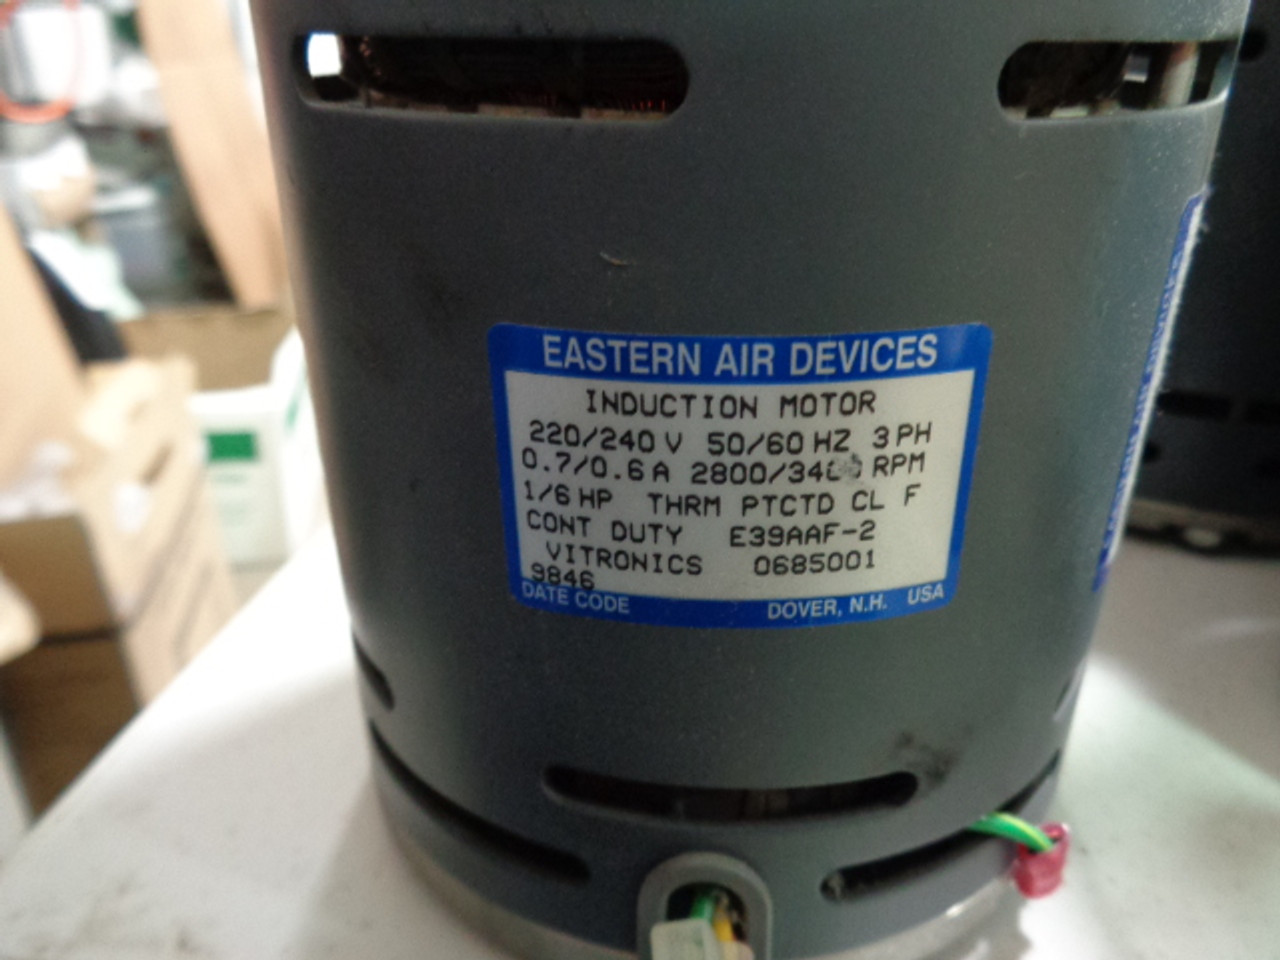 Eastern Air Devices E39AAF-2 Induction Motor 220/240V 50/60Hz 3PH 1/6HP (Vitronic Blower Motor)2